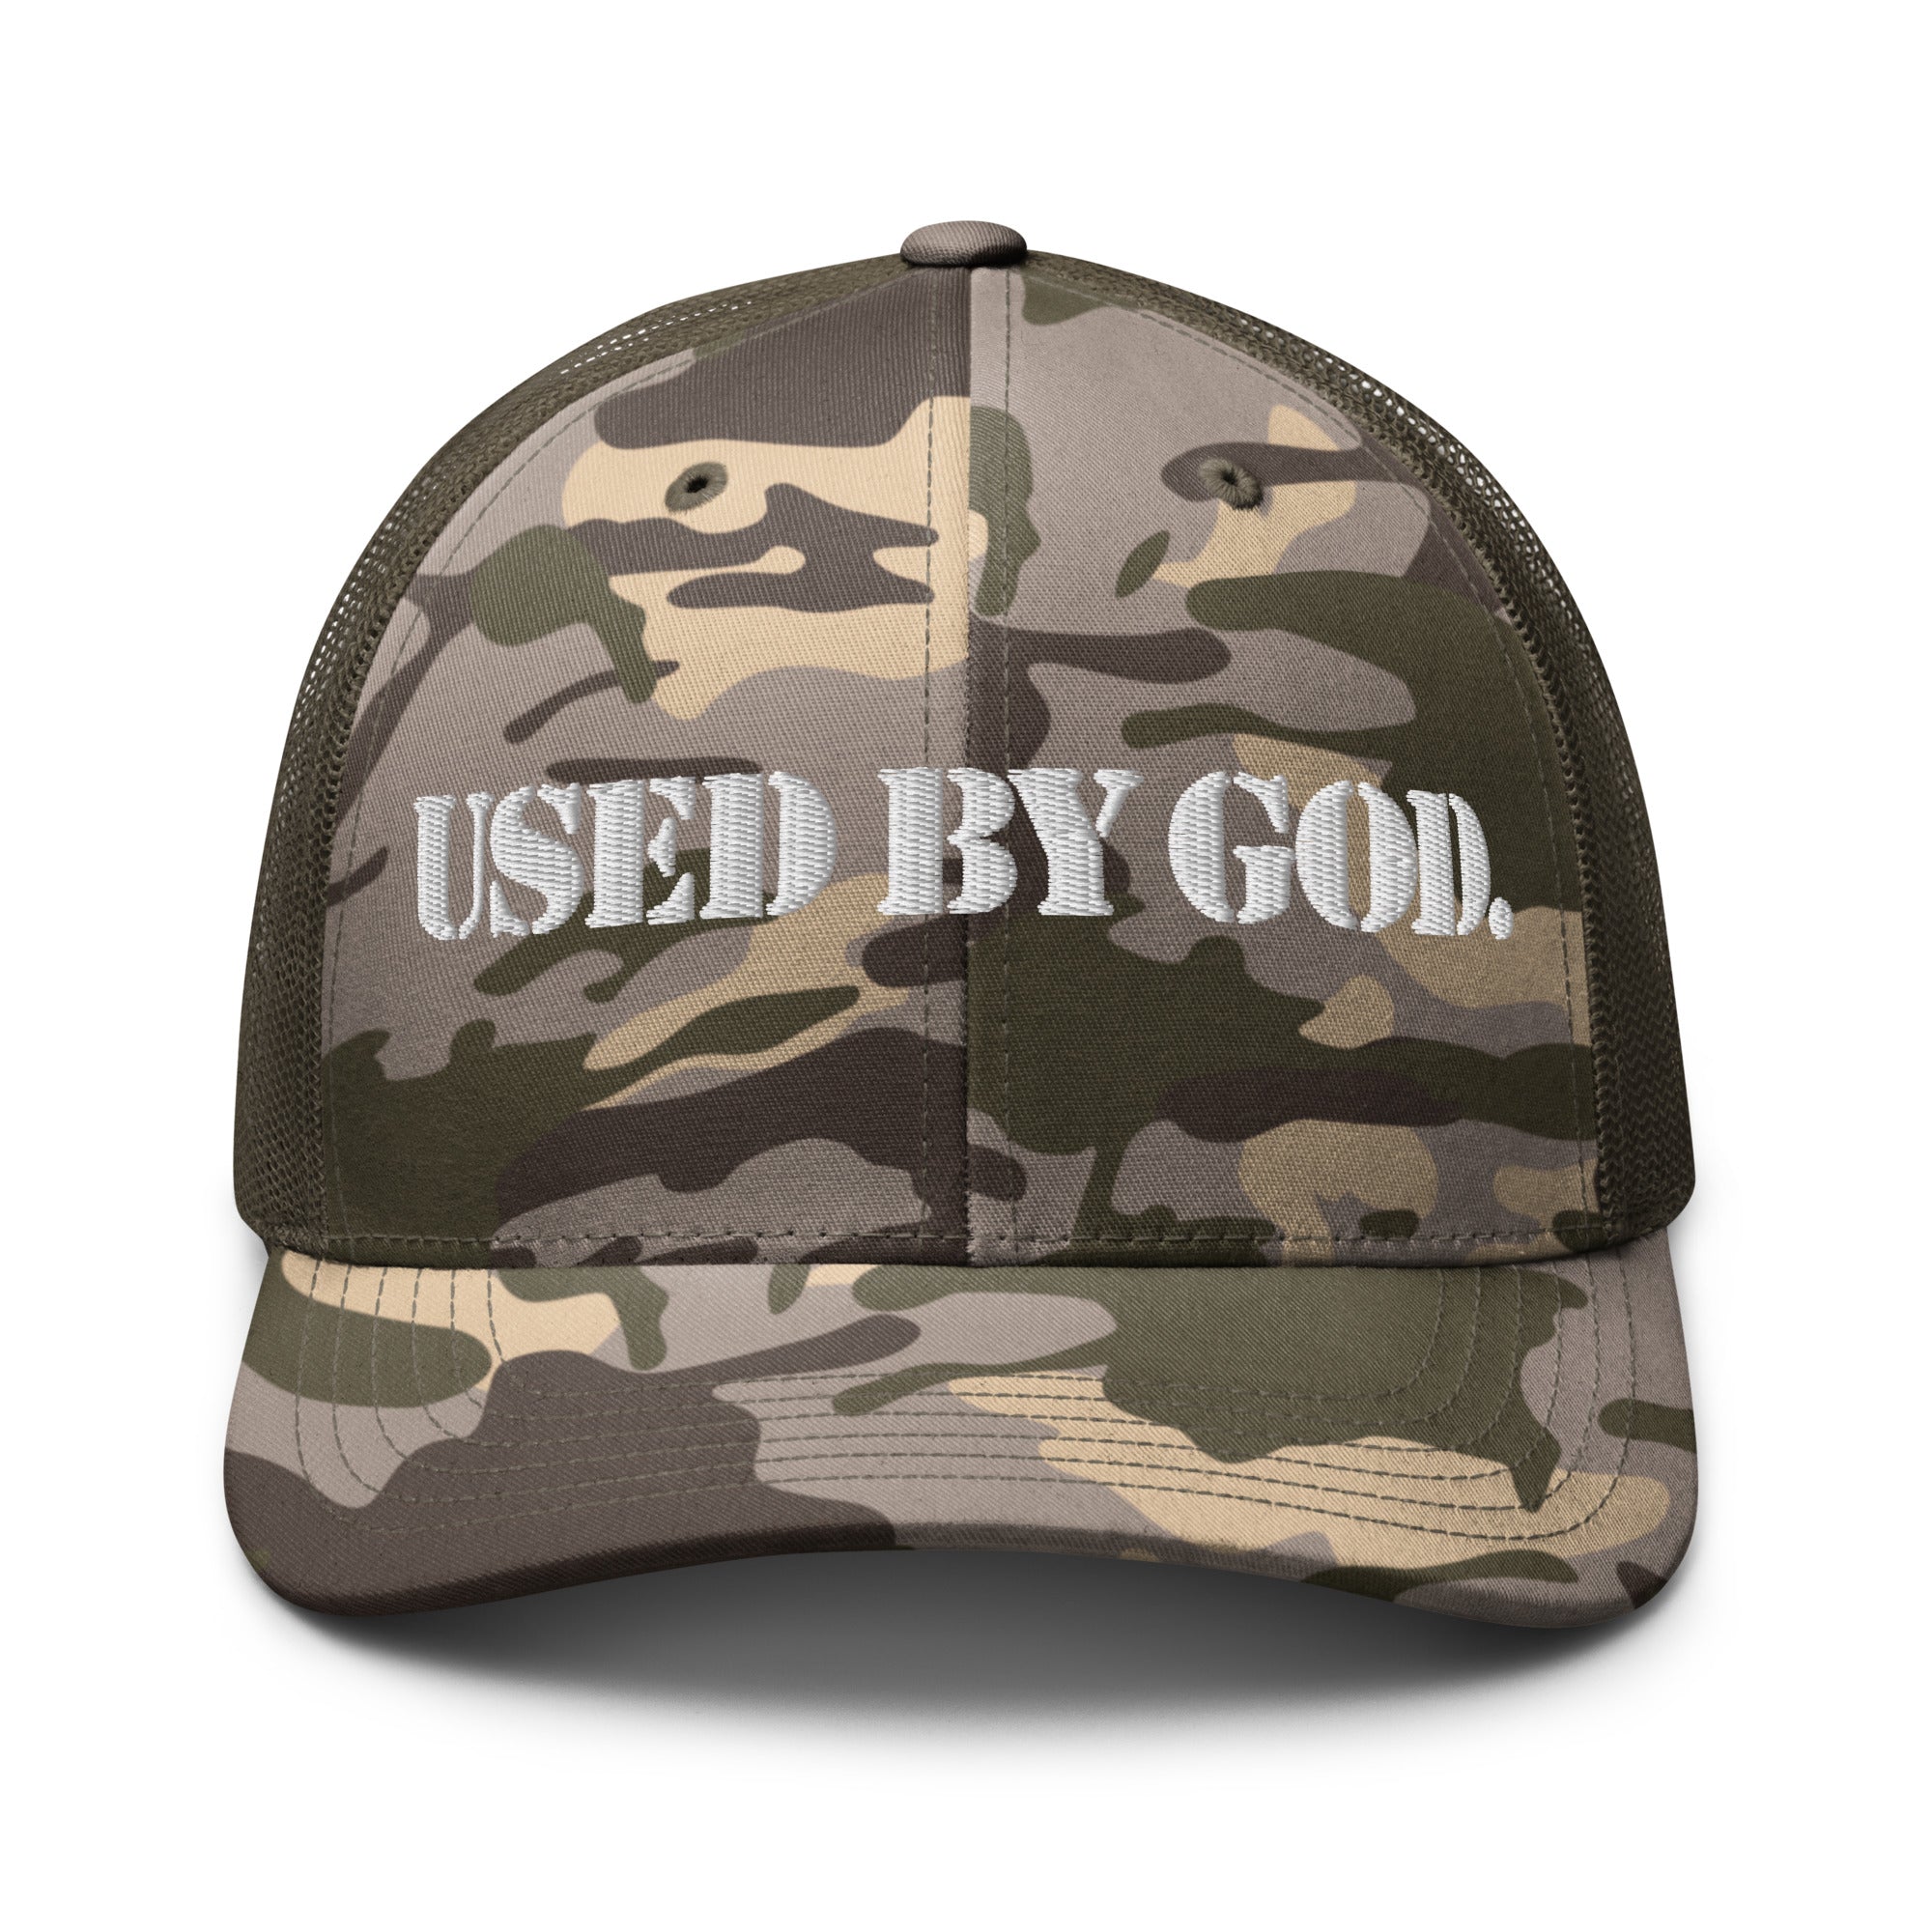 UBG Soldier Camo Trucker Hat, Used By God, Used By God Clothing, Christian Apparel, Christian Hats, Christian T-Shirts, Christian Clothing, God Shirts, Christian Sweatshirts, God Clothing, Jesus Hoodie, Jesus Clothes, God Is Dope, Art Of Homage, Red Letter Clothing, Elevated Faith, Active Faith Sports, Beacon Threads, God The Father Apparel